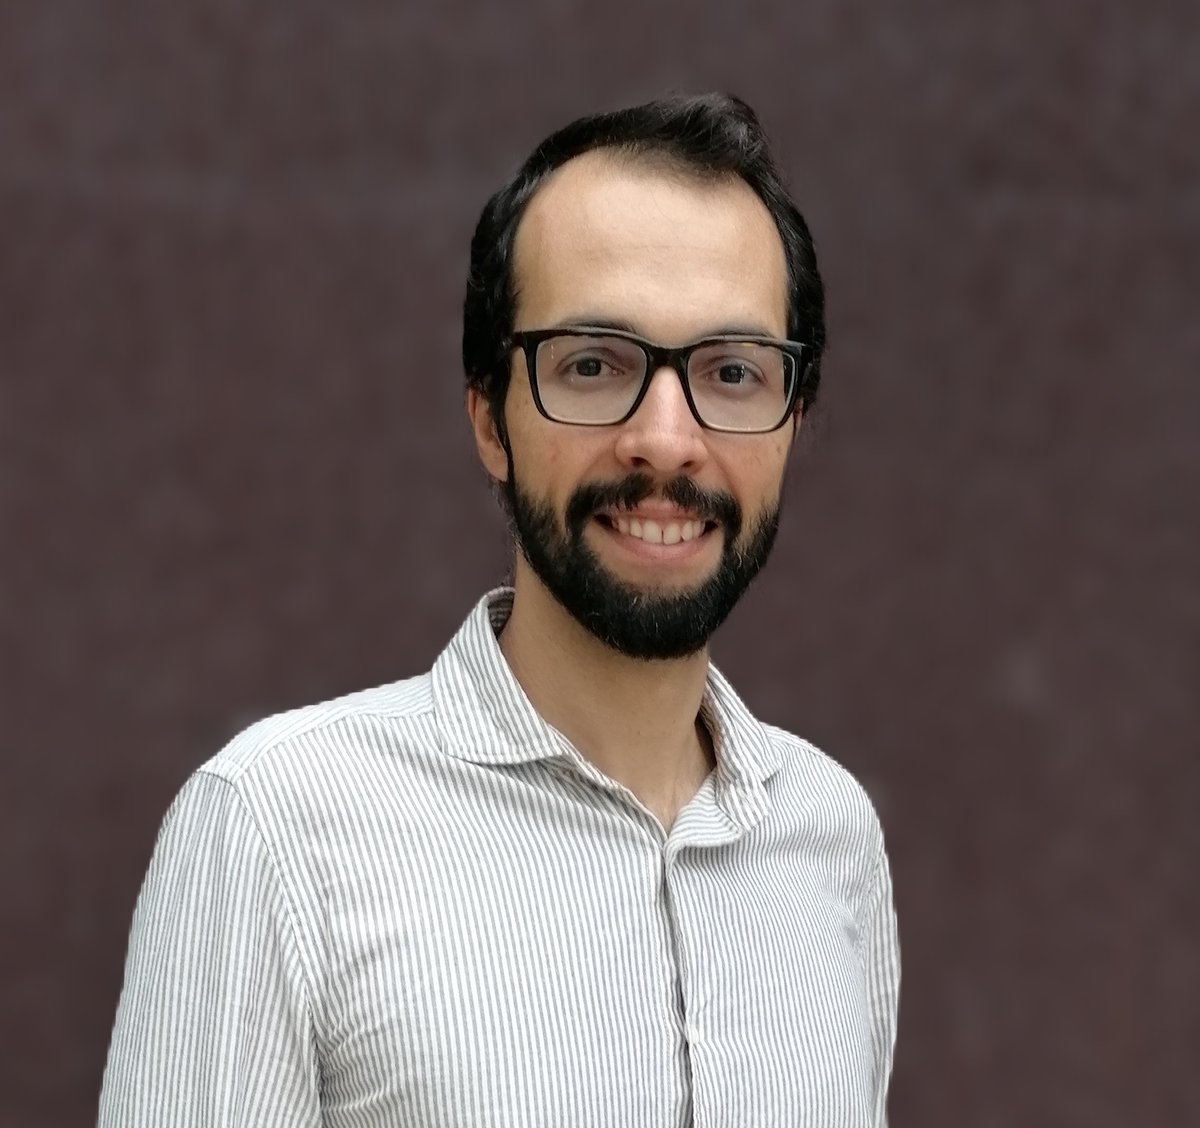 Mauricio Rocha-Martins @Mau__rocha will lead the new Max Planck Research Group “Embryo Self-correction” at the @MPI_Muenster. Looking forward to his interesting research and many interactions with colleagues from the CiMIC @uni_muenster! mpi-muenster.mpg.de/pressrelease/r…